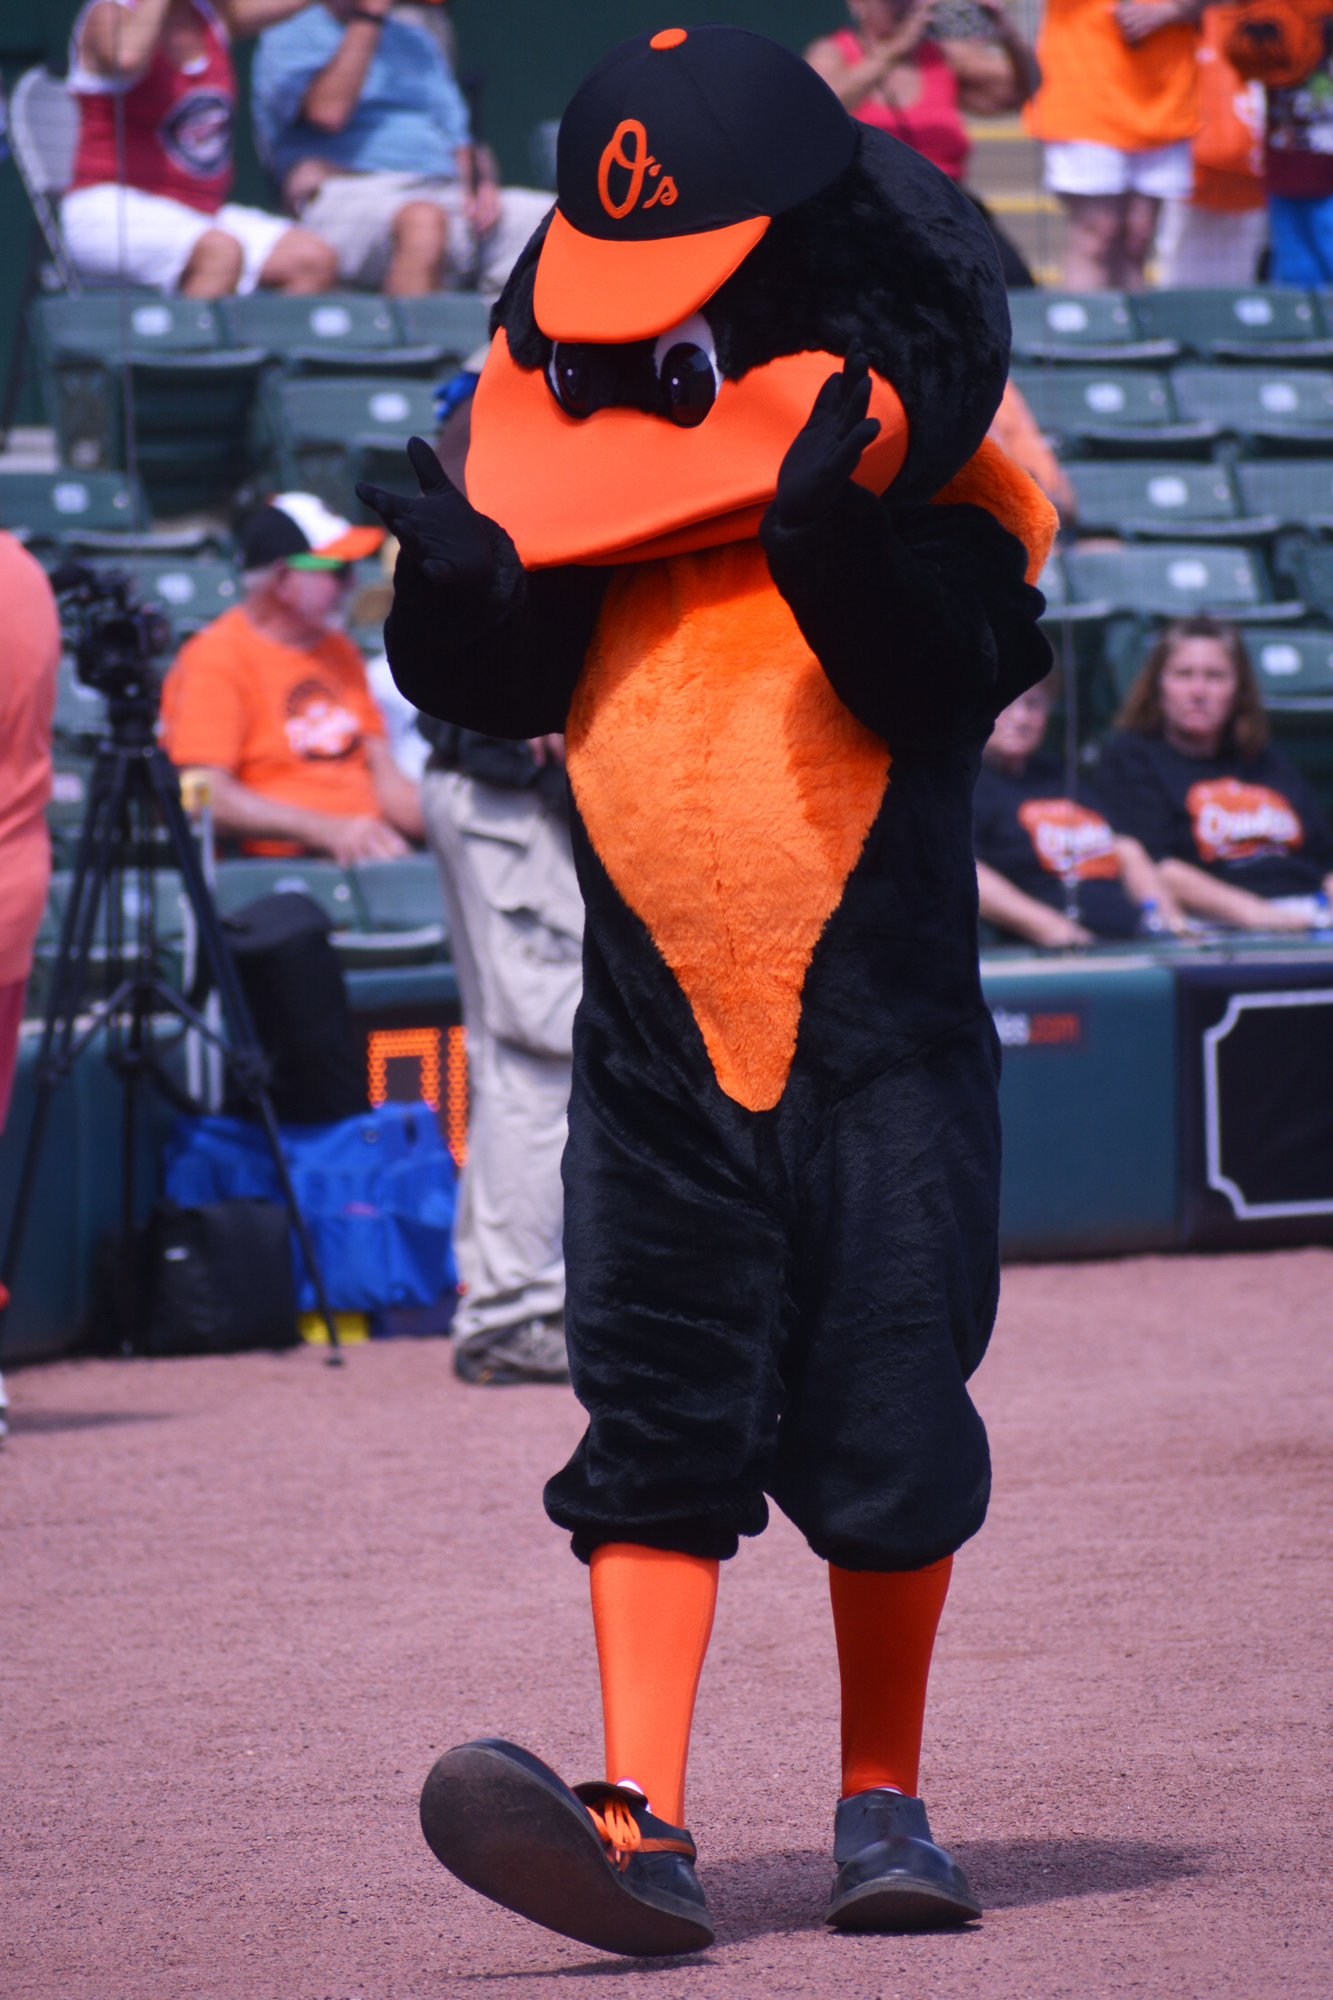 The Oriole Bird fires up the crowd.